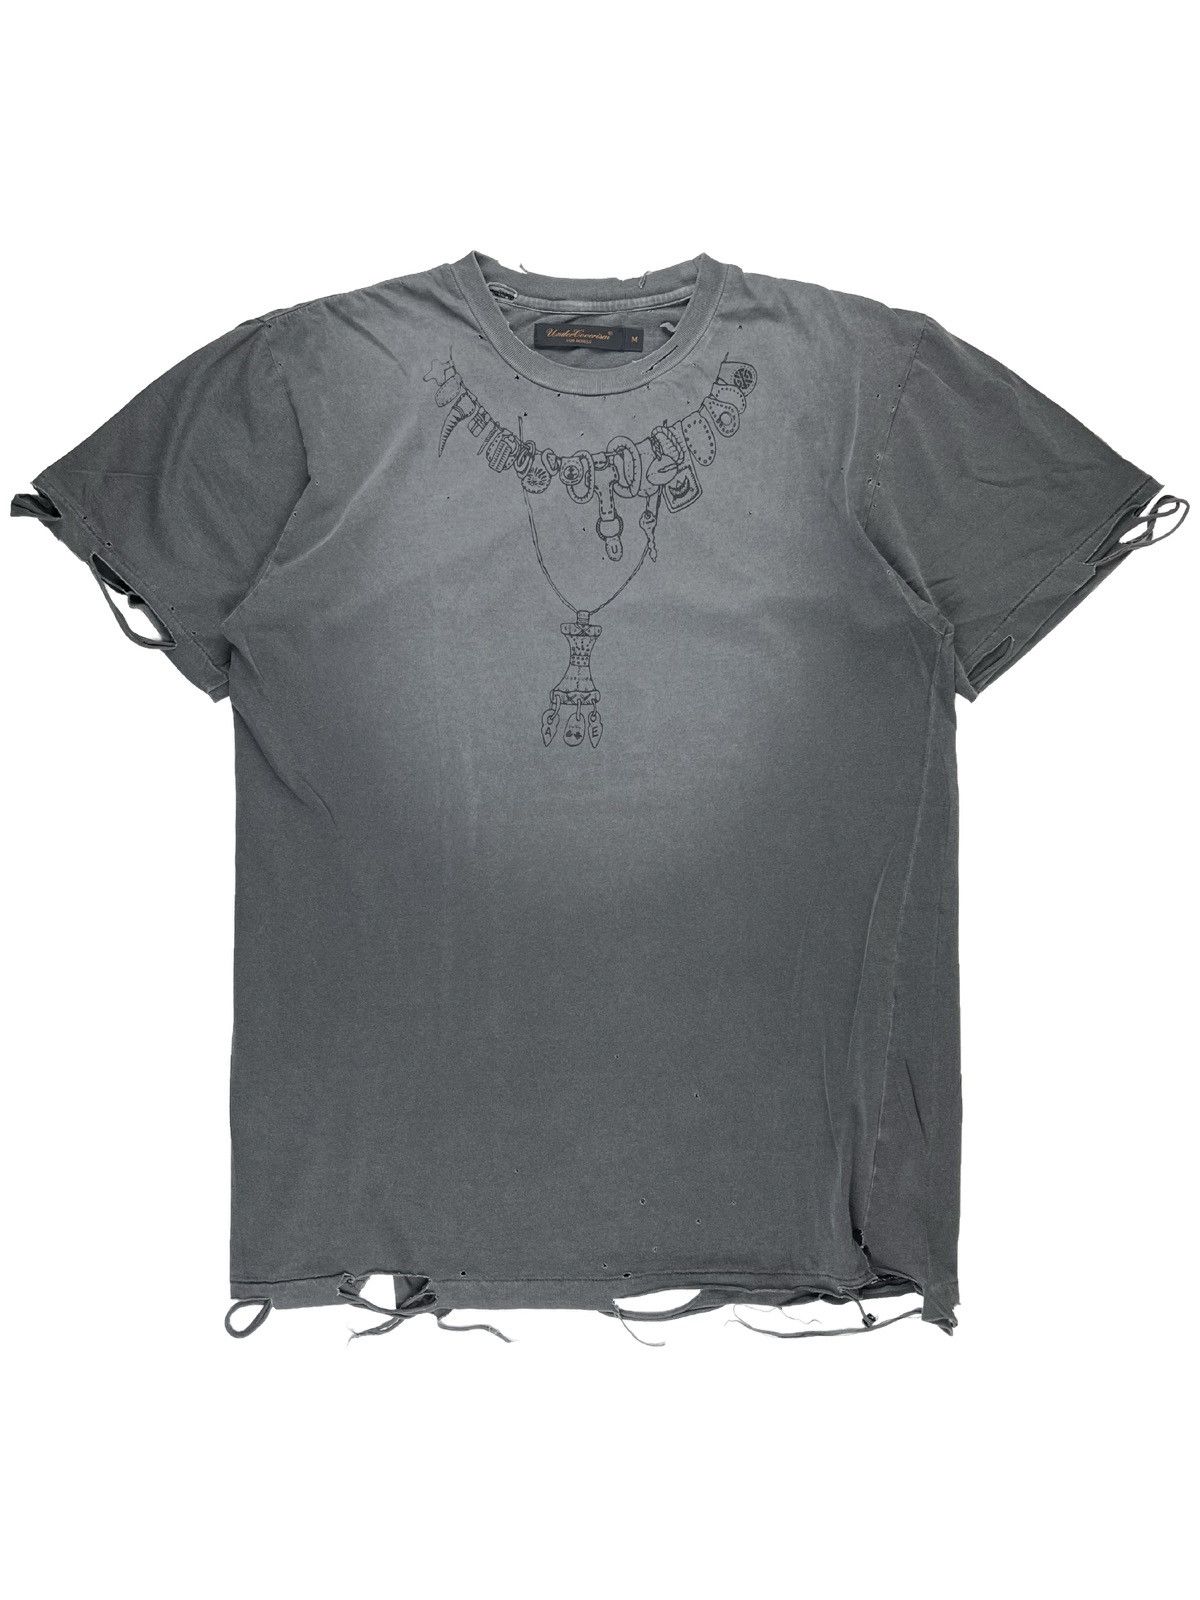 Undercover SS03 Undercover Scab Amulet Necklace Thrashed Tshirt 